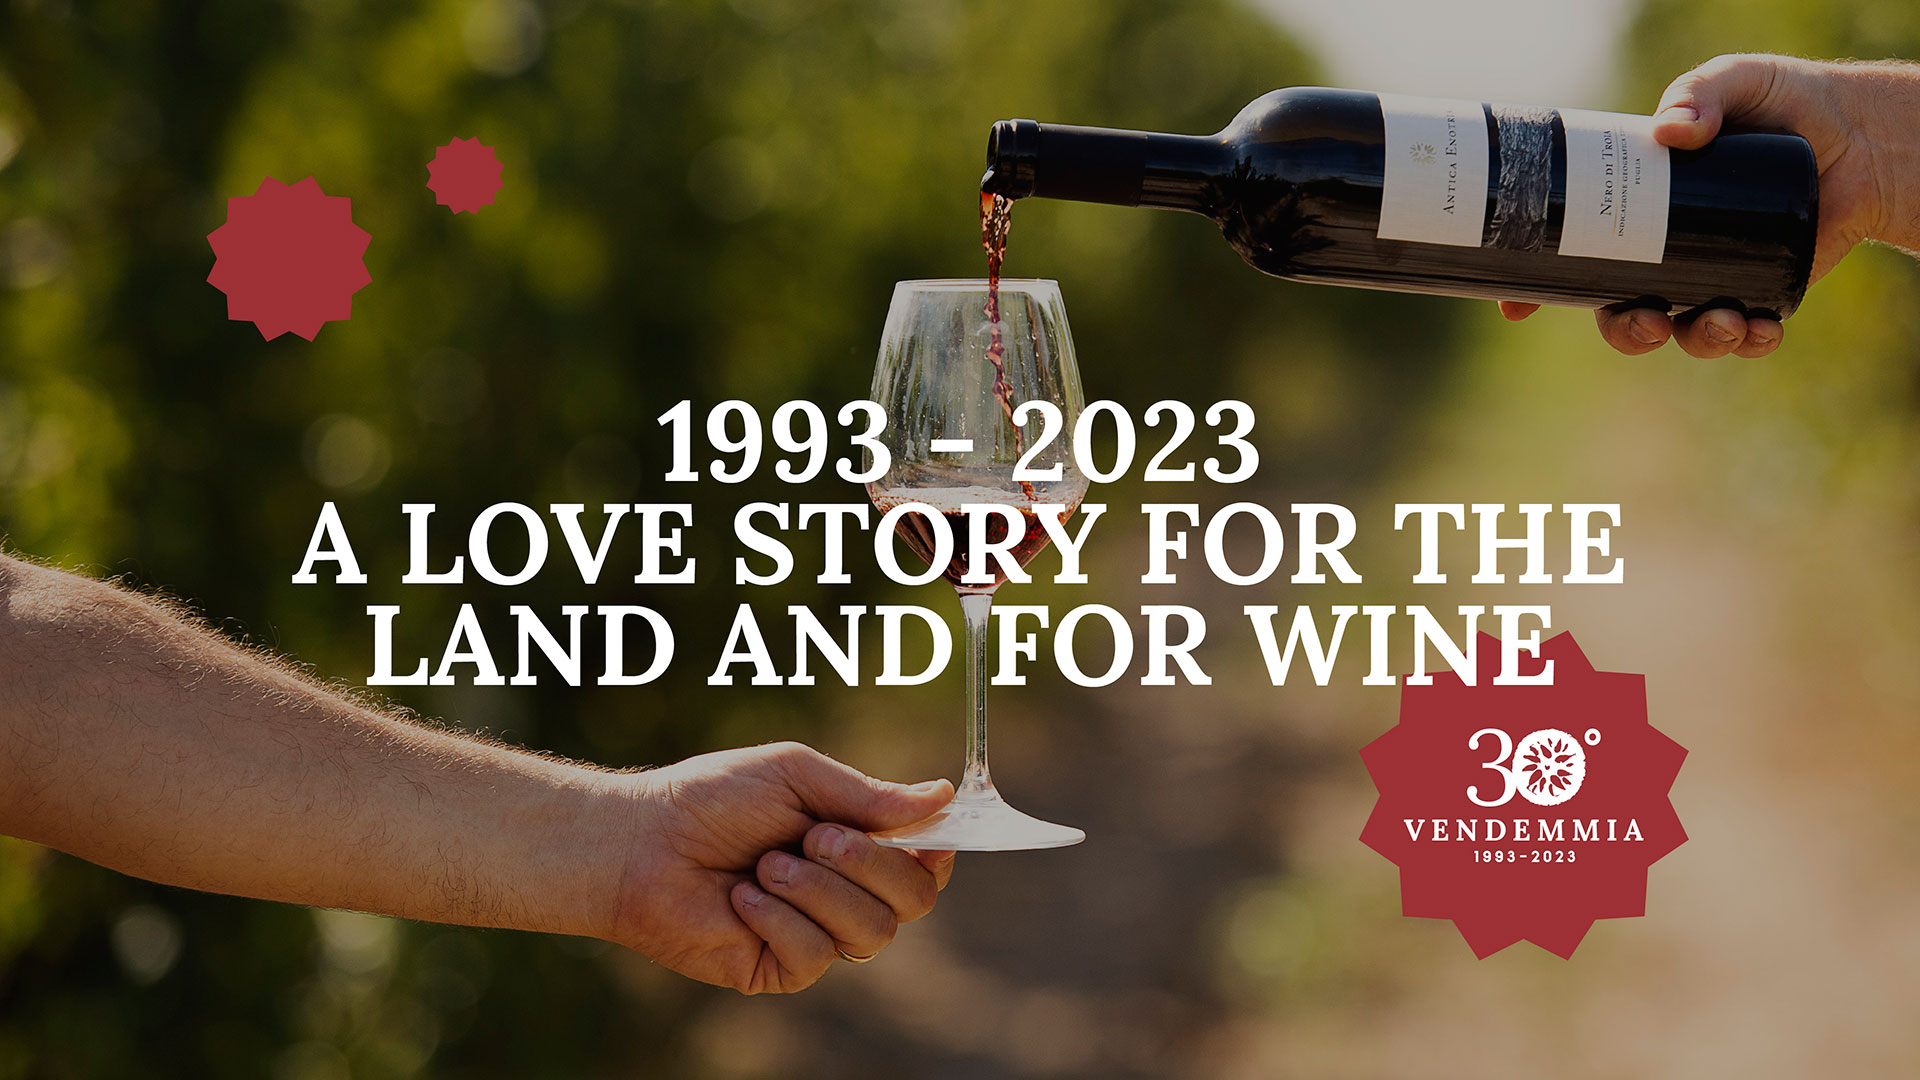 30th harvest: our passion for organic wine since 1993